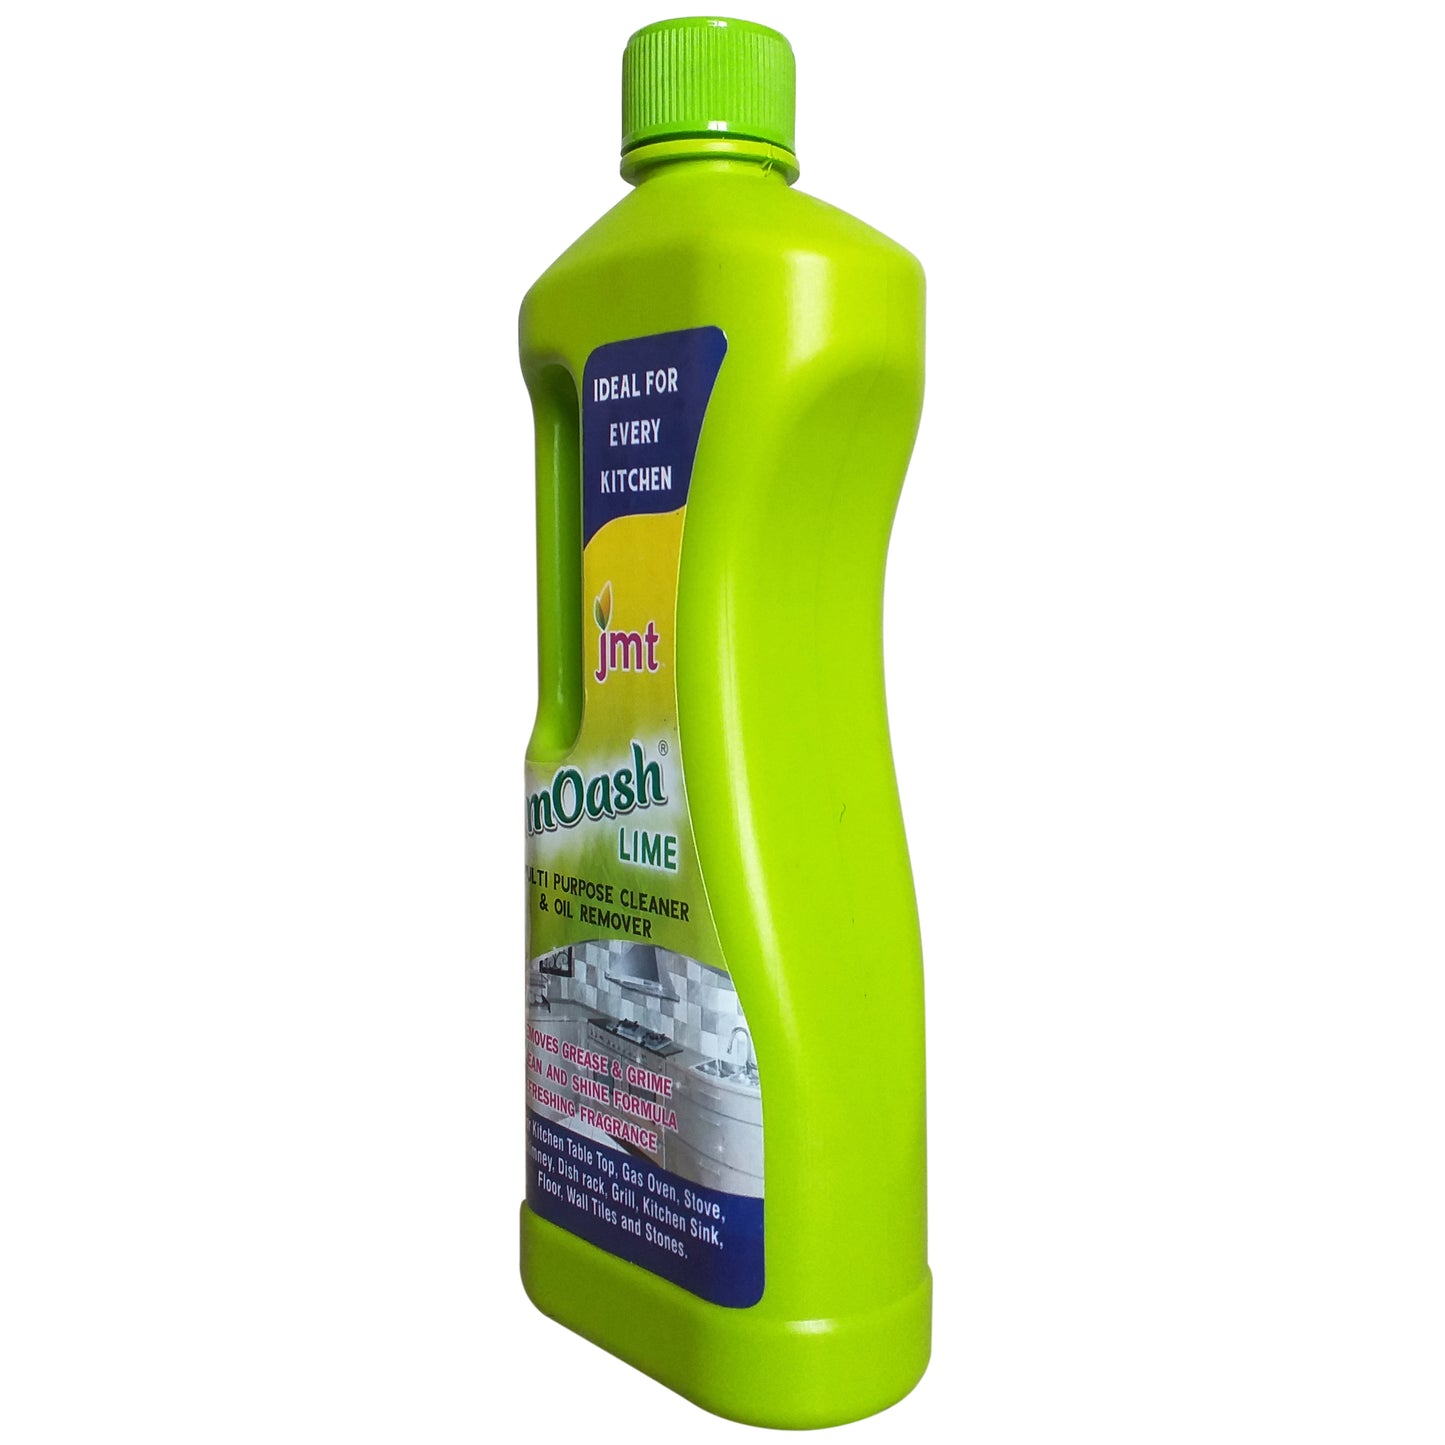 500ml Imoash Lime Multi-purpose Kitchen Cleaner and Oil Remover